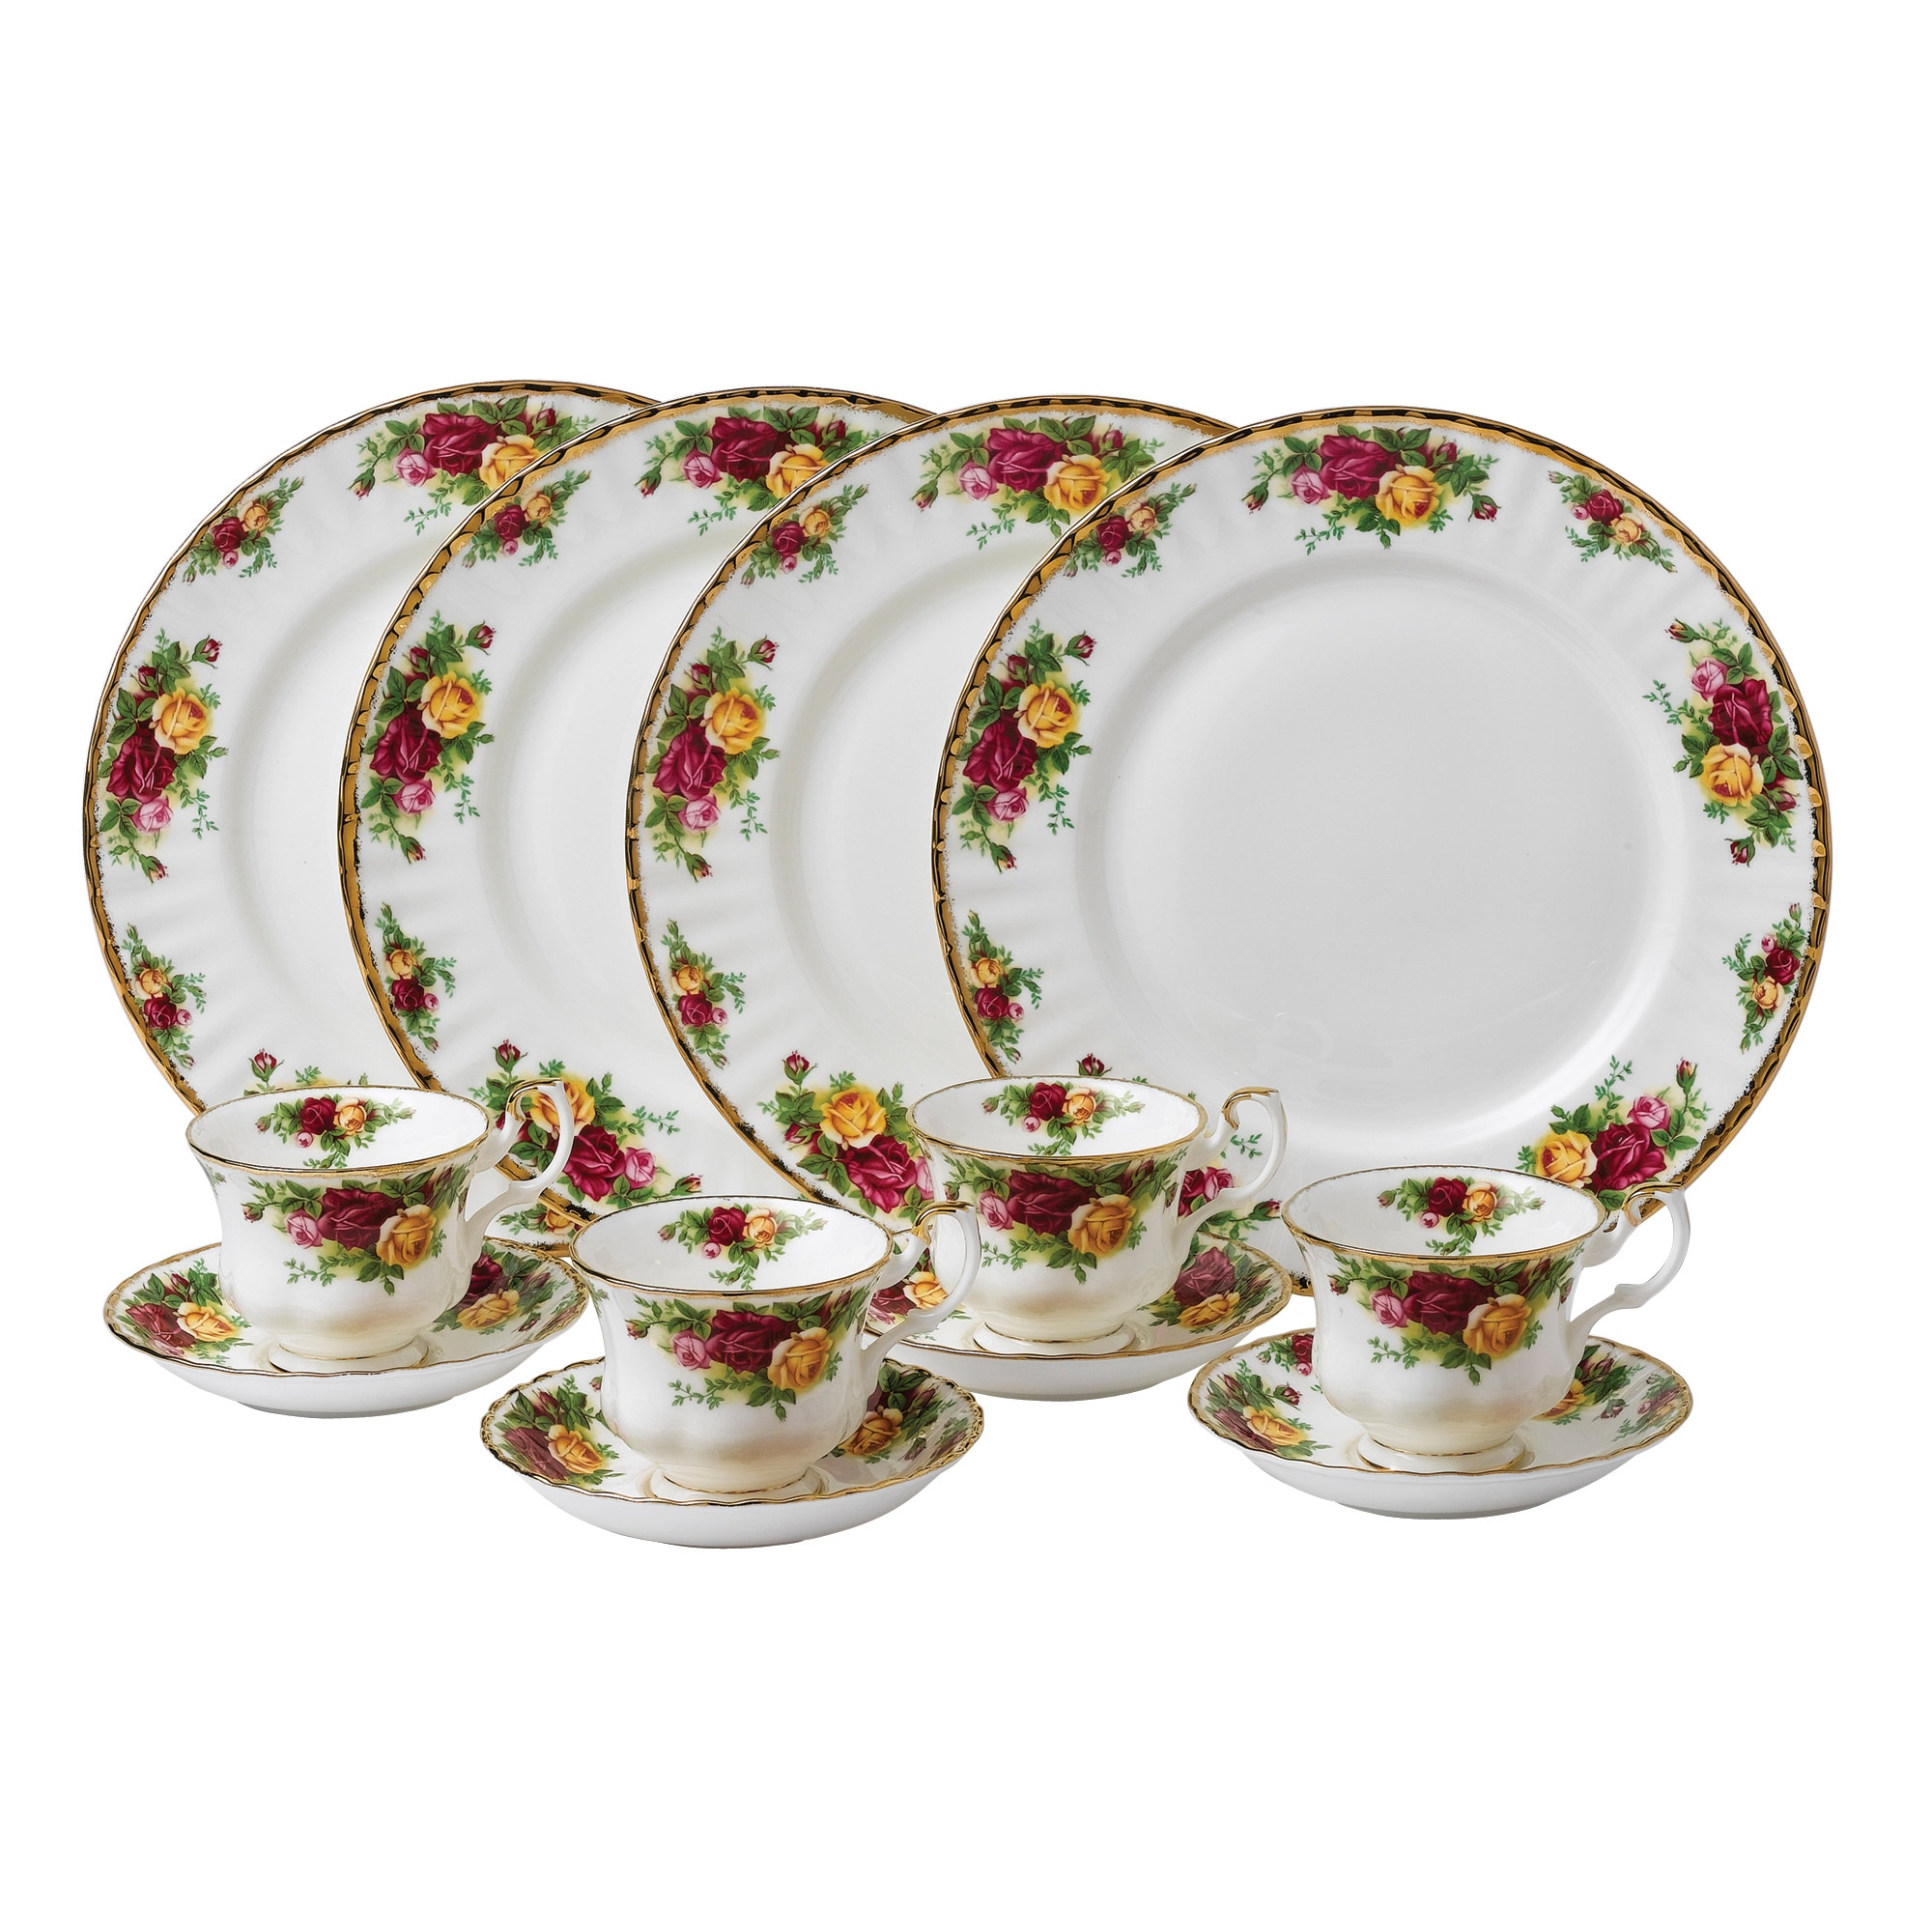 Royal Albert Old Country Roses 12-piece Dinnerware Set - On Sale